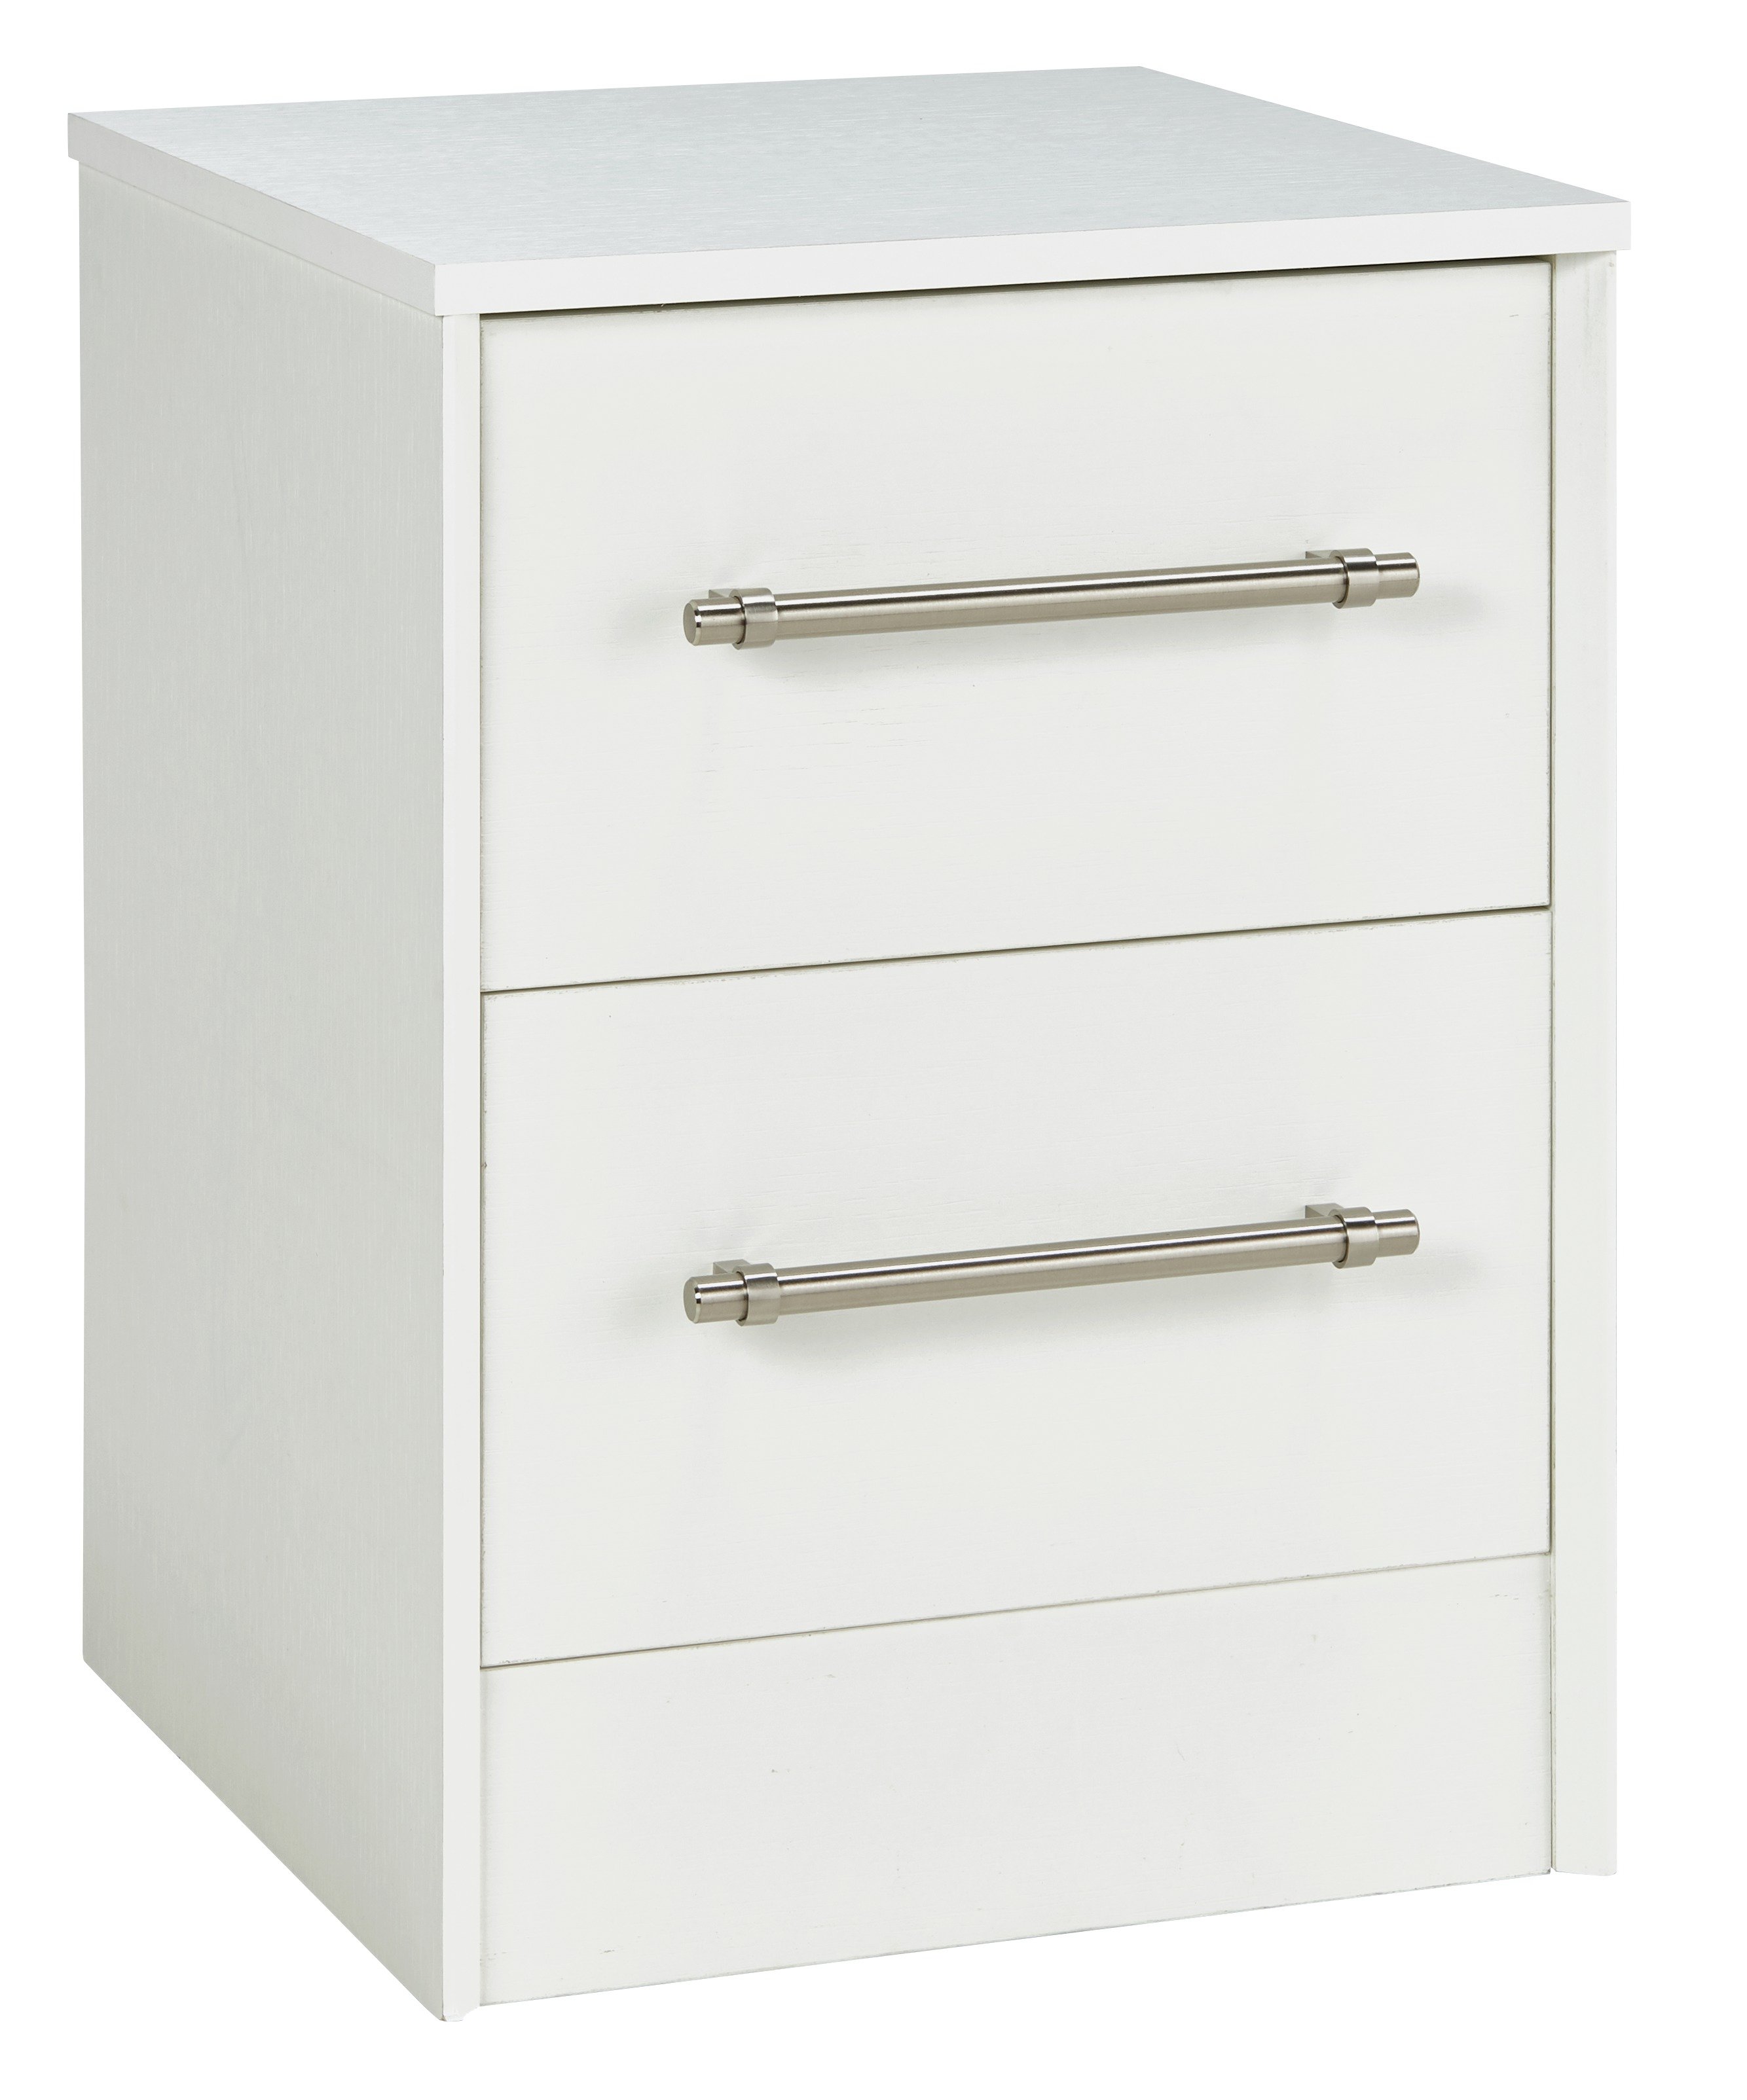 Victoria 2 Drawer Bedside Table - White